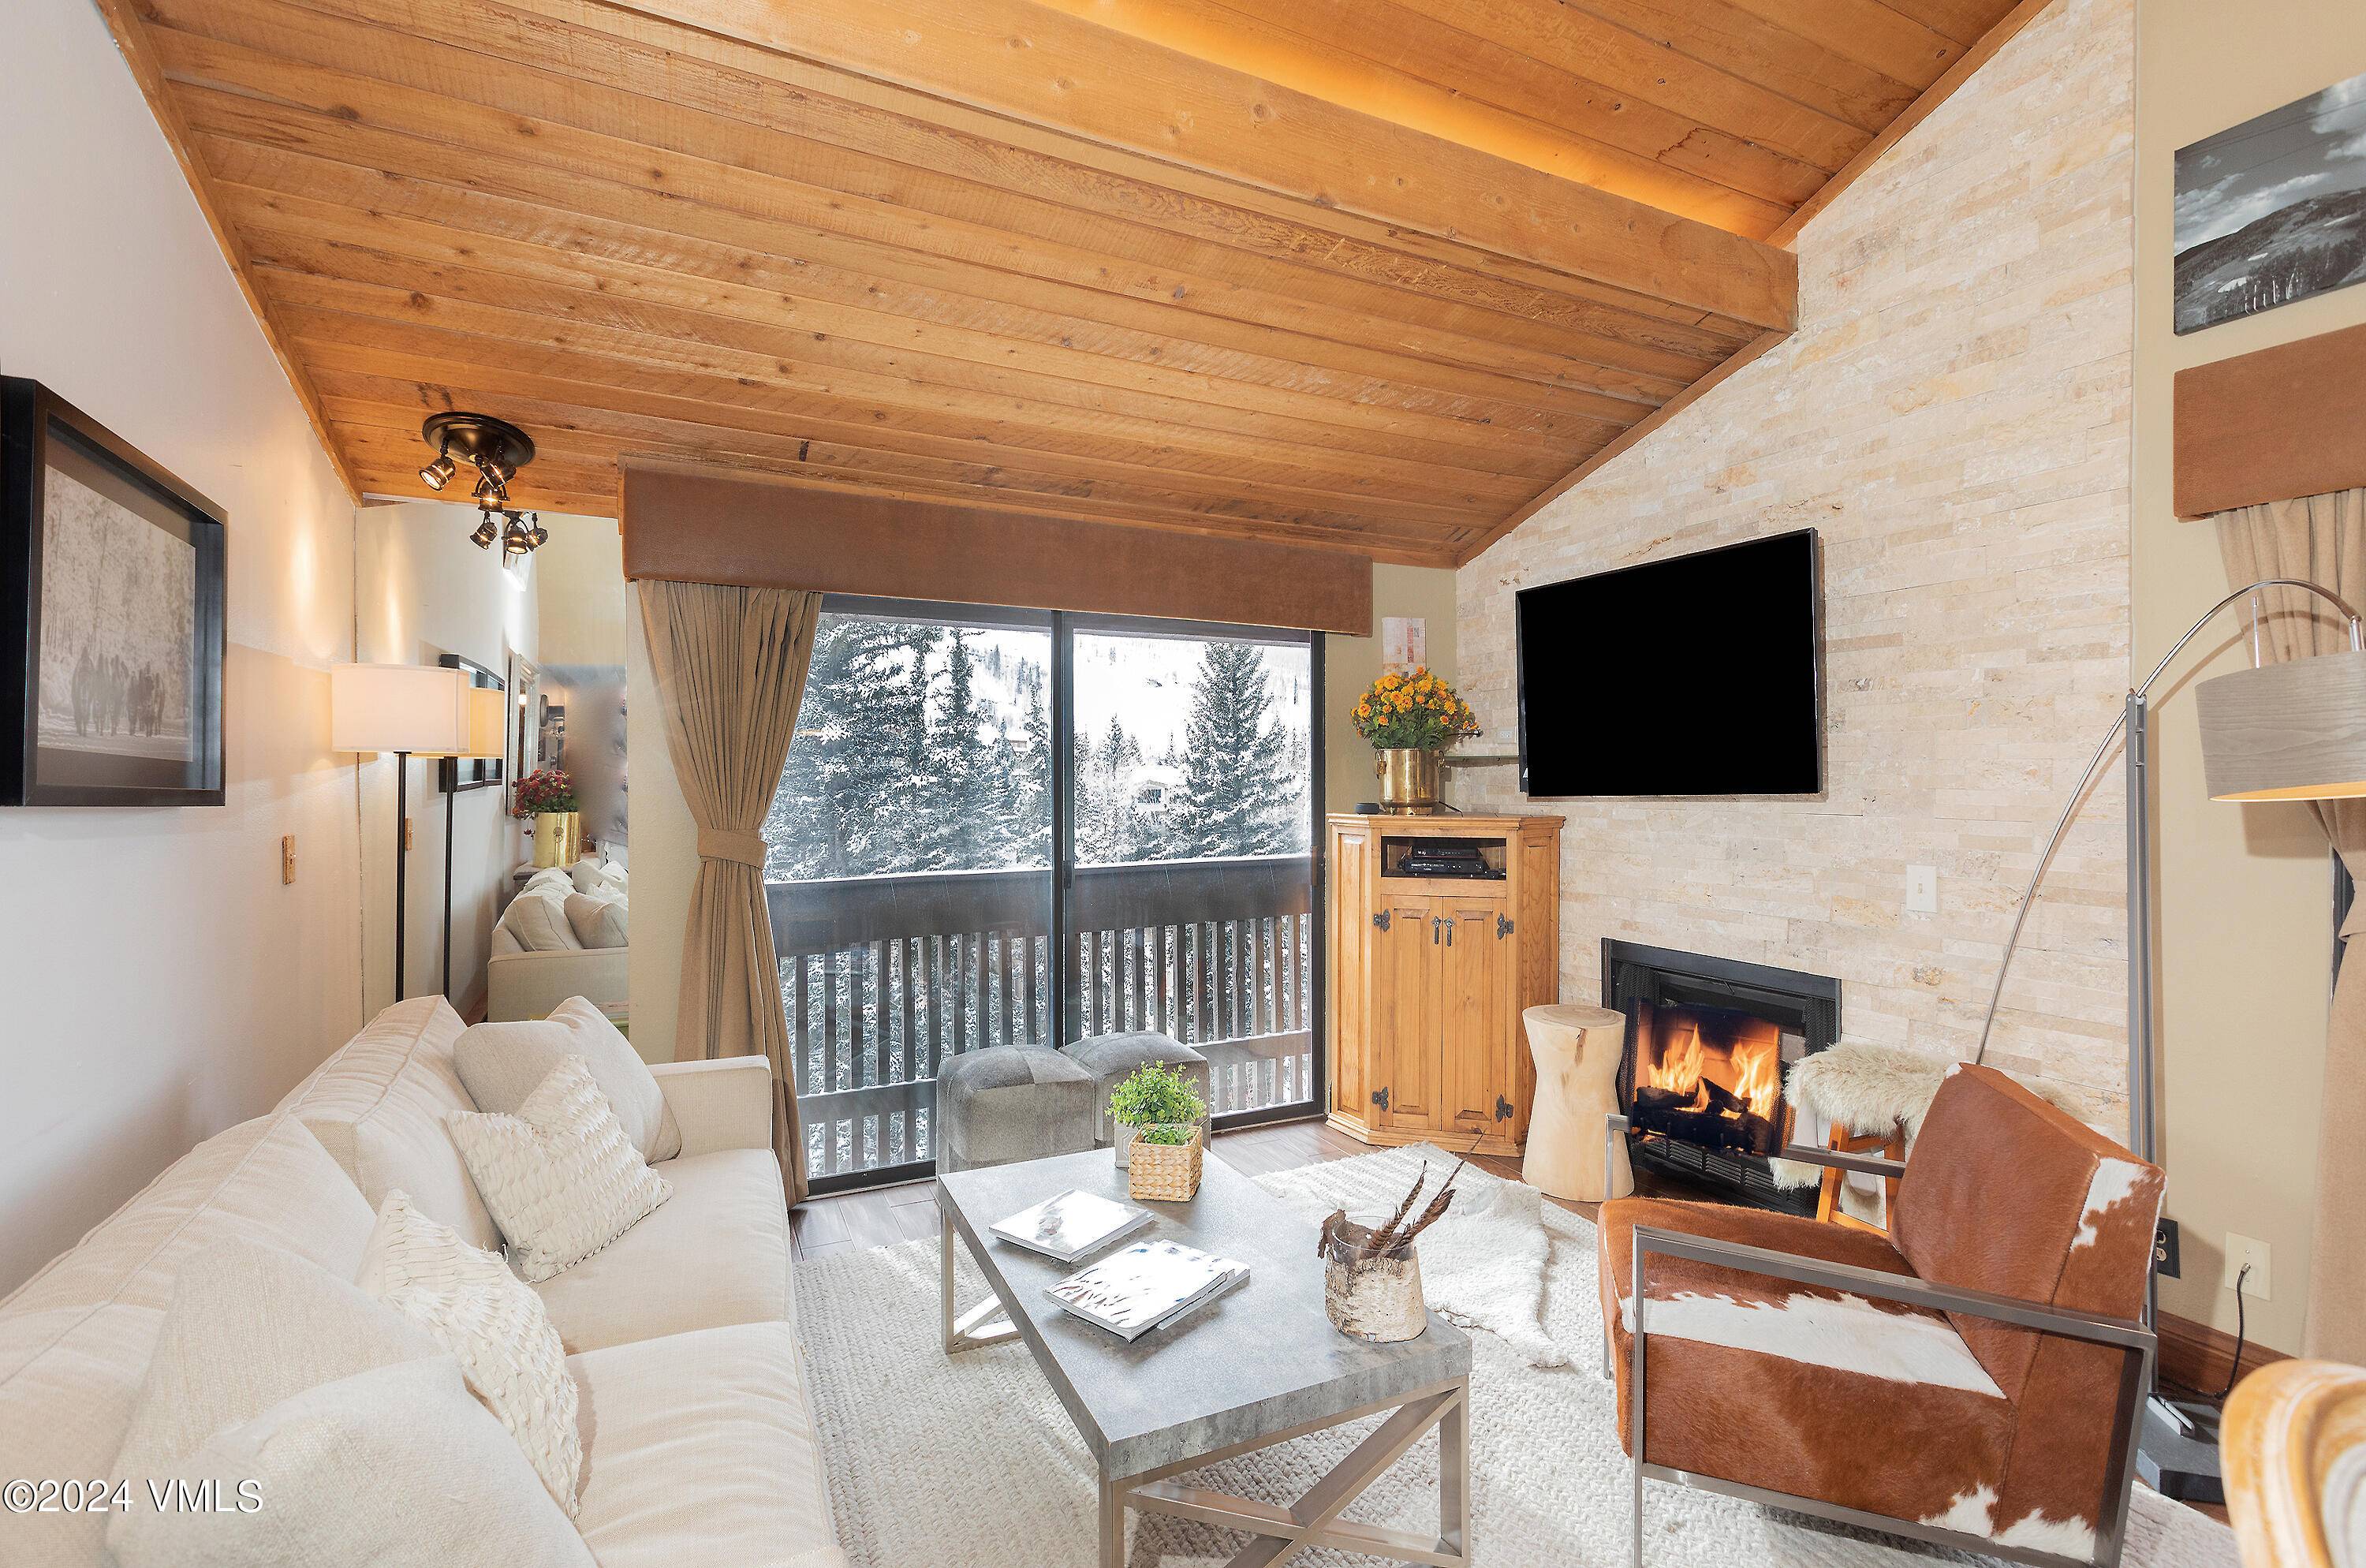 A two bedroom condominium on Gore Creek with 180 degree views of Vails Golden Peak ski slopes and a short walk to Vail Village shops, restaurants and the Ford Amphitheater.